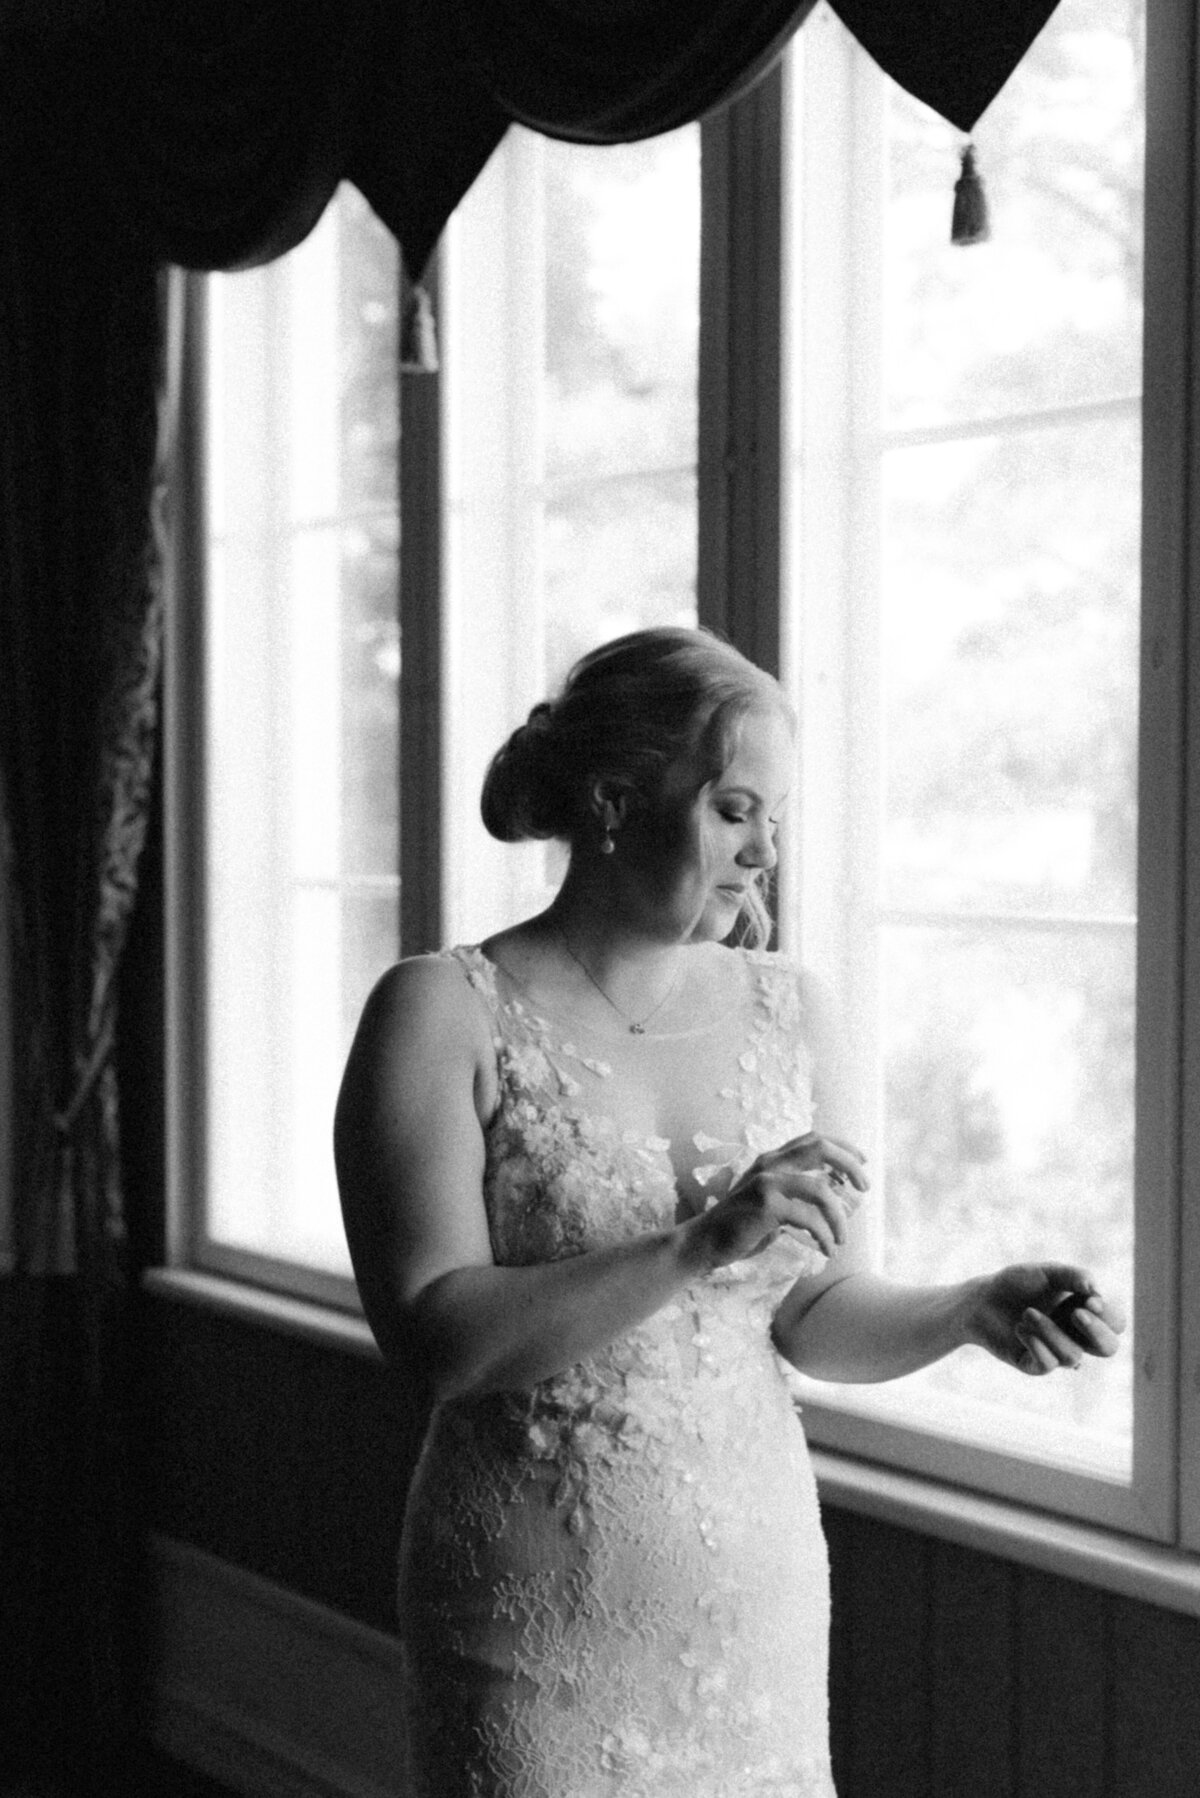 The bride putting on the perfume in an image photographed by wedding photographer Hannika Gabrielsson.